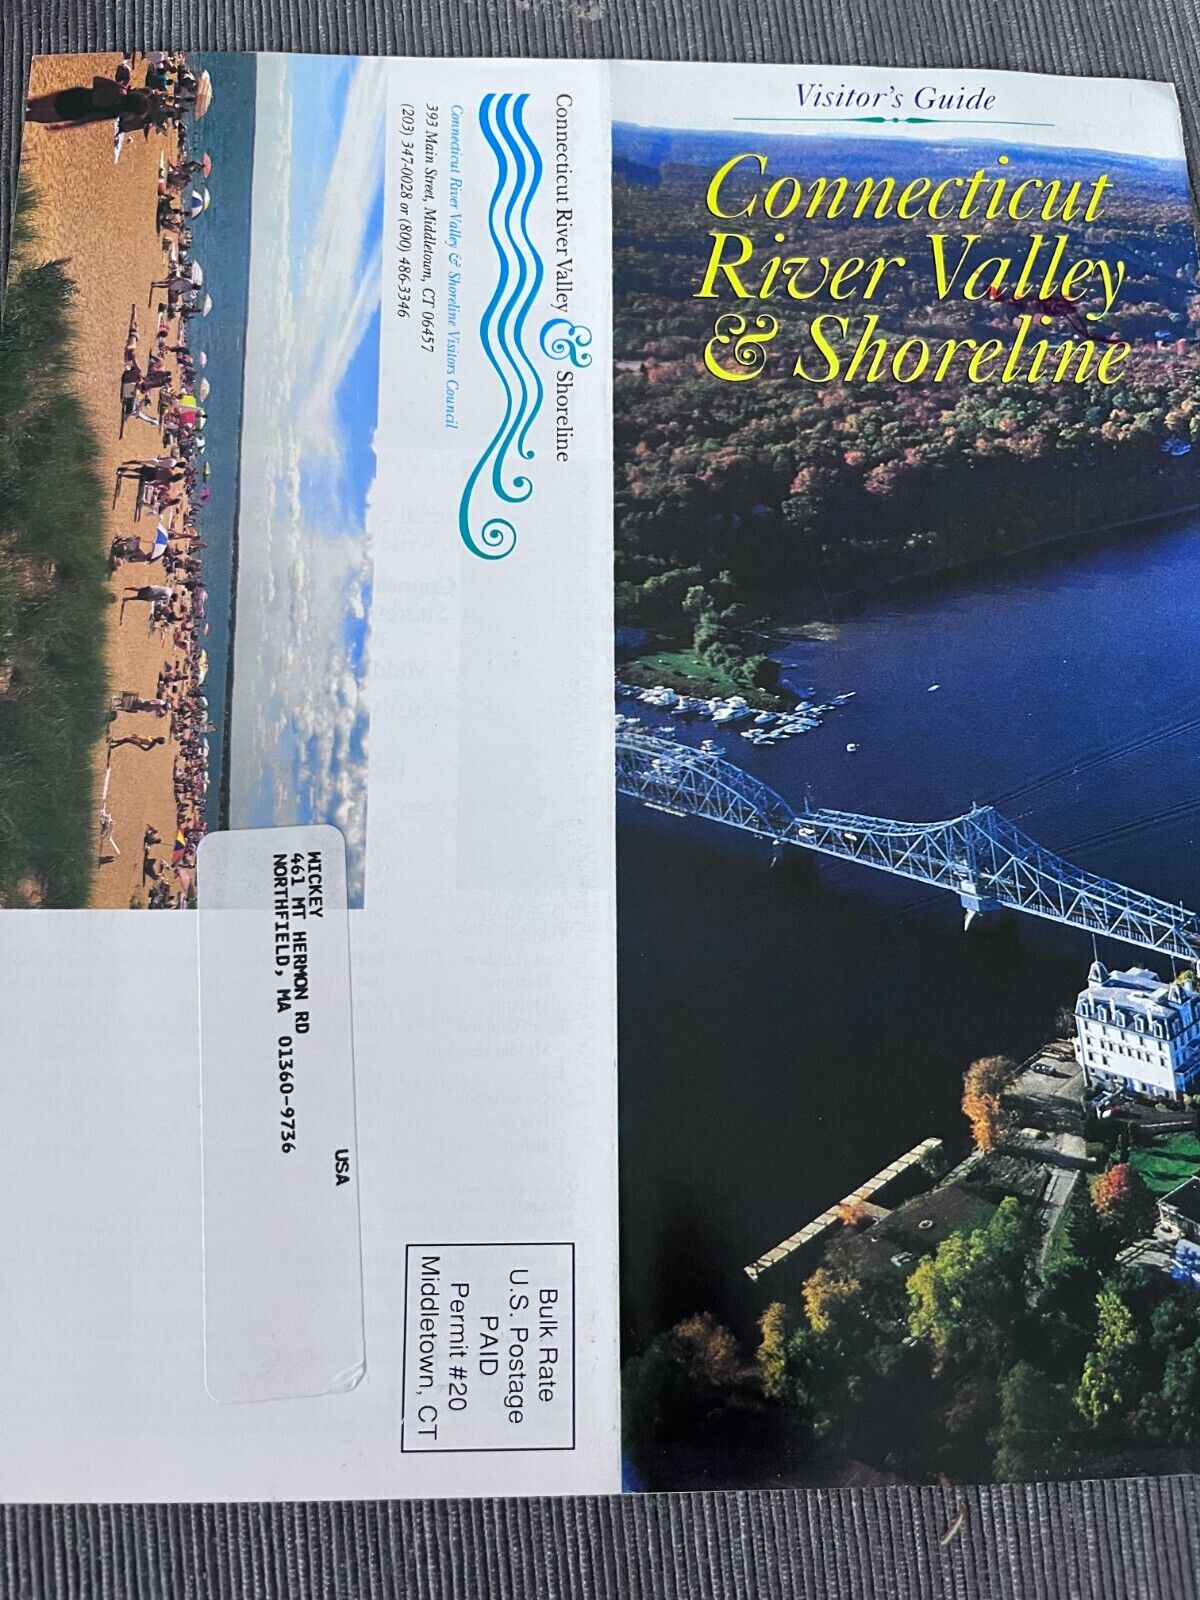 1990s Connecticut River Valley and Shoreline travel brochure